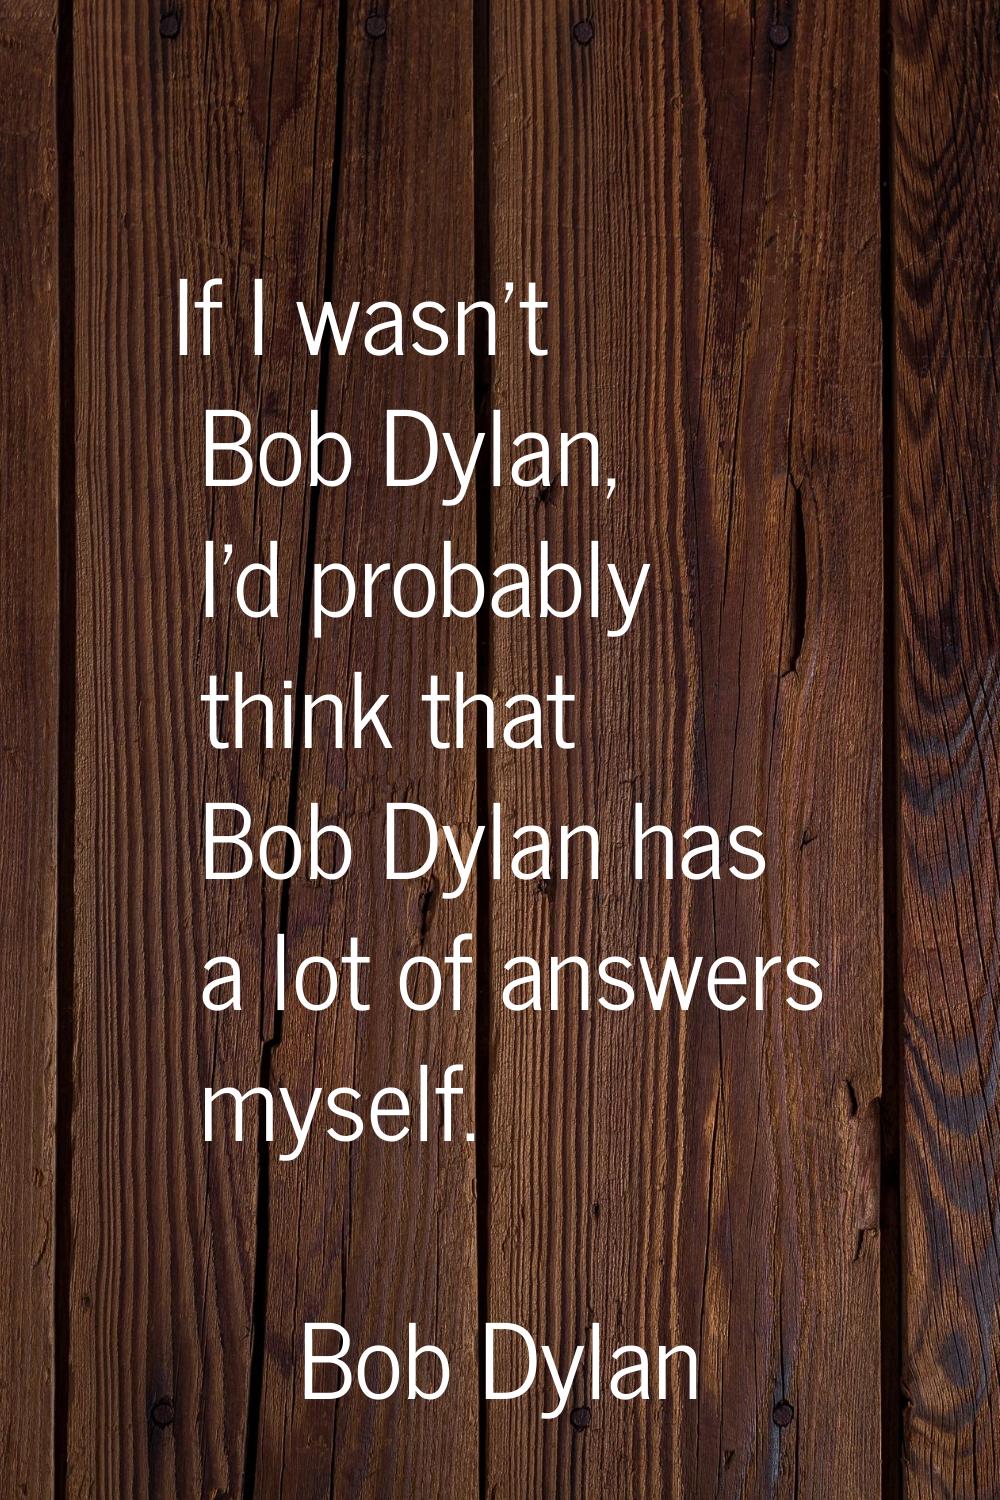 If I wasn't Bob Dylan, I'd probably think that Bob Dylan has a lot of answers myself.